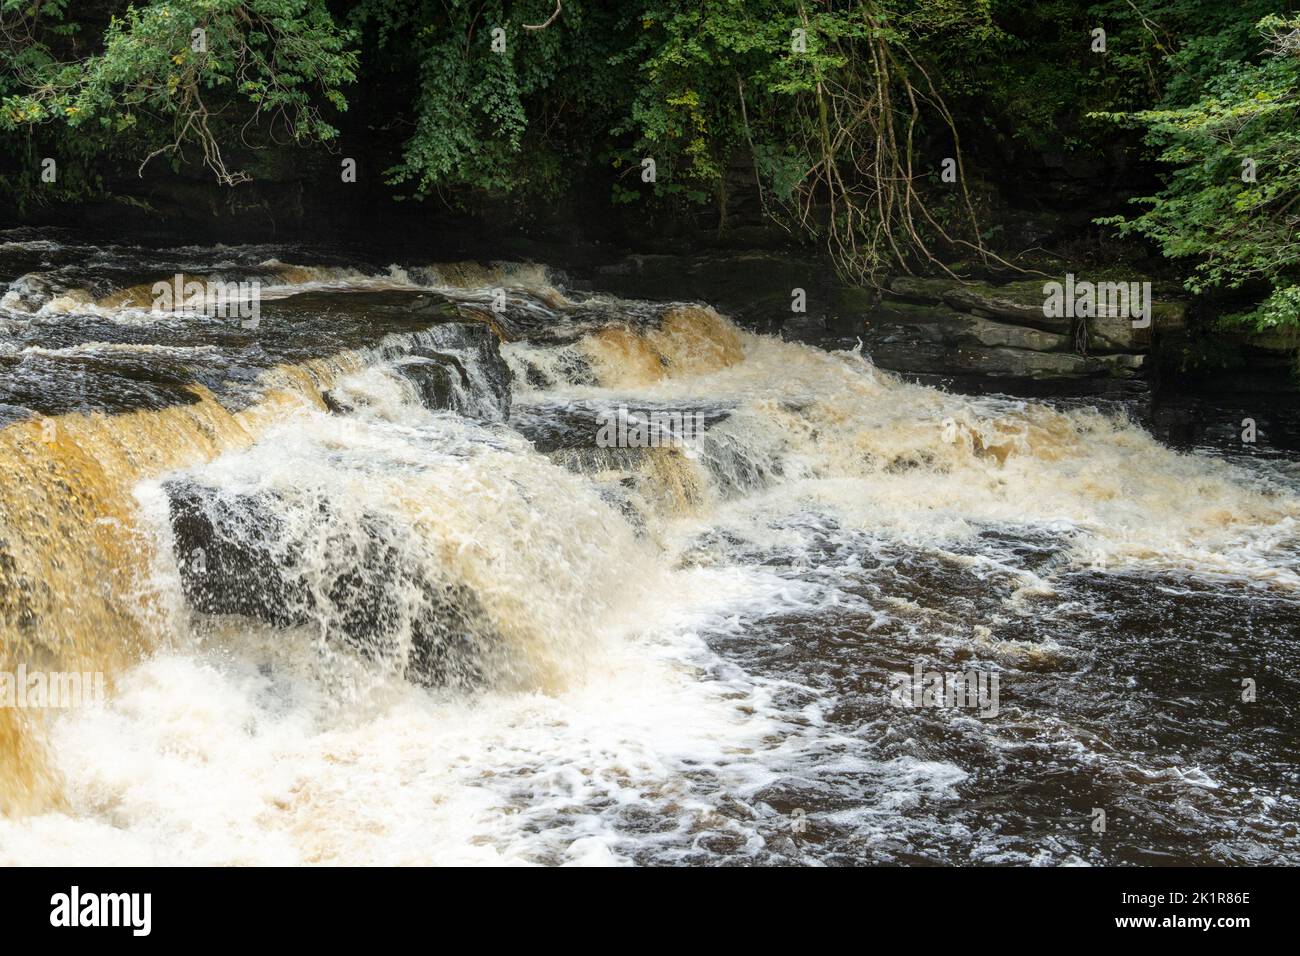 The Falls of Clyde - a waterfall on the River Clyde in Scotland, UK. Stock Photo